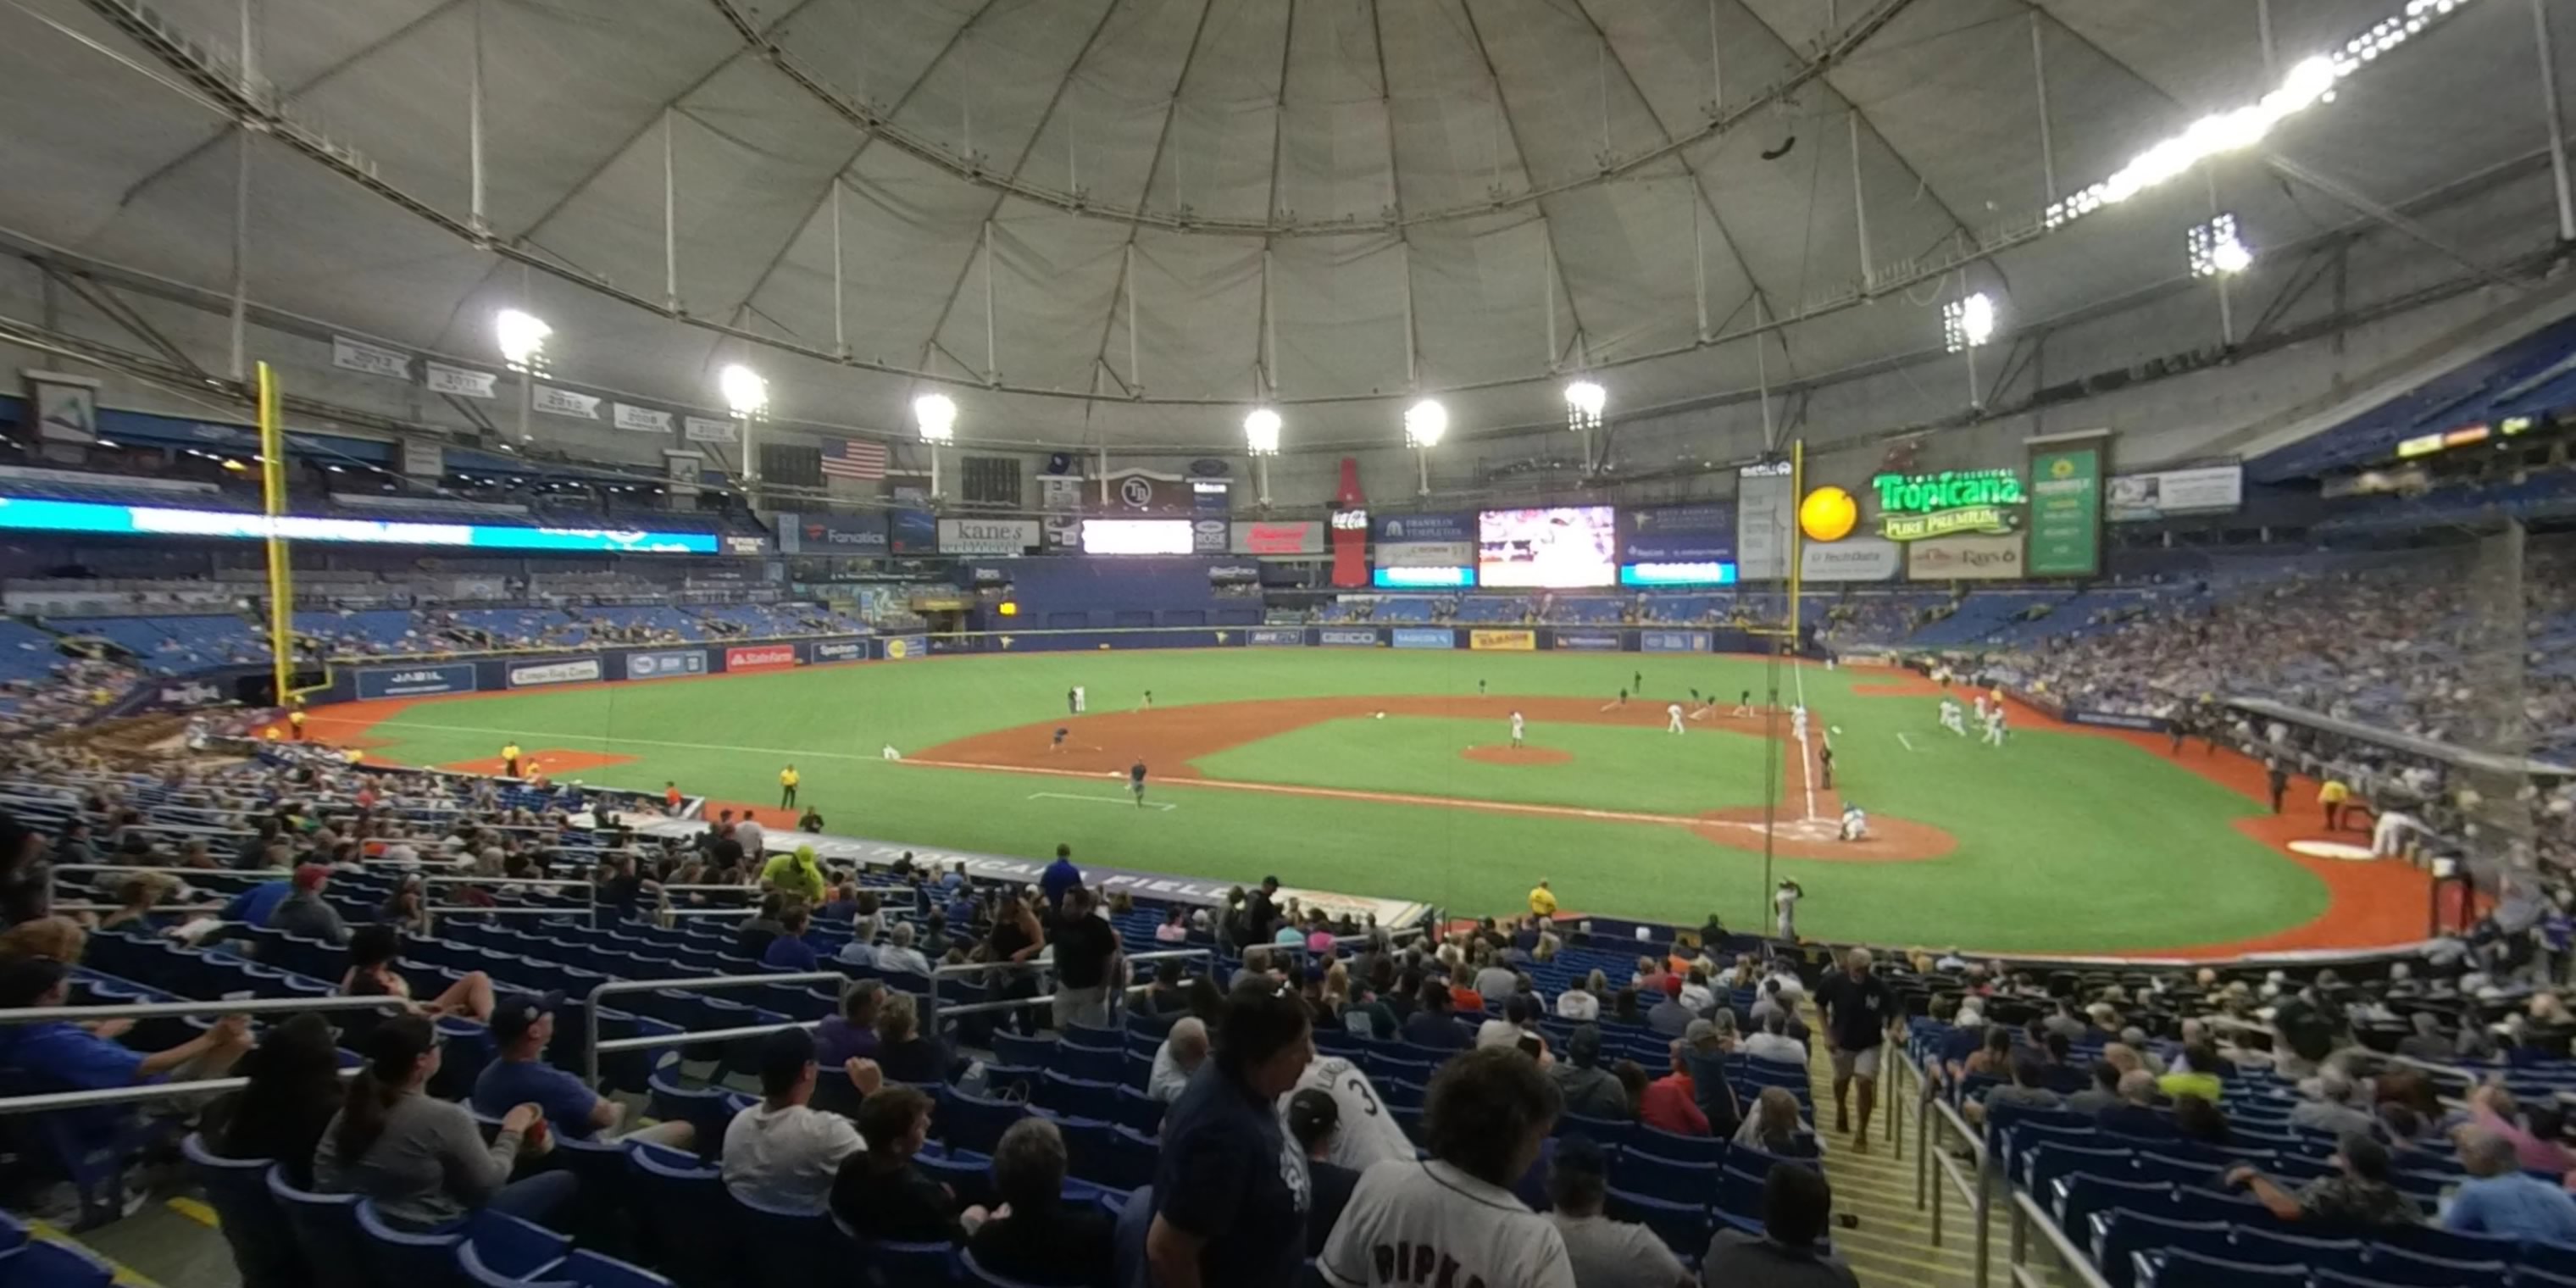 section 109 panoramic seat view  for baseball - tropicana field